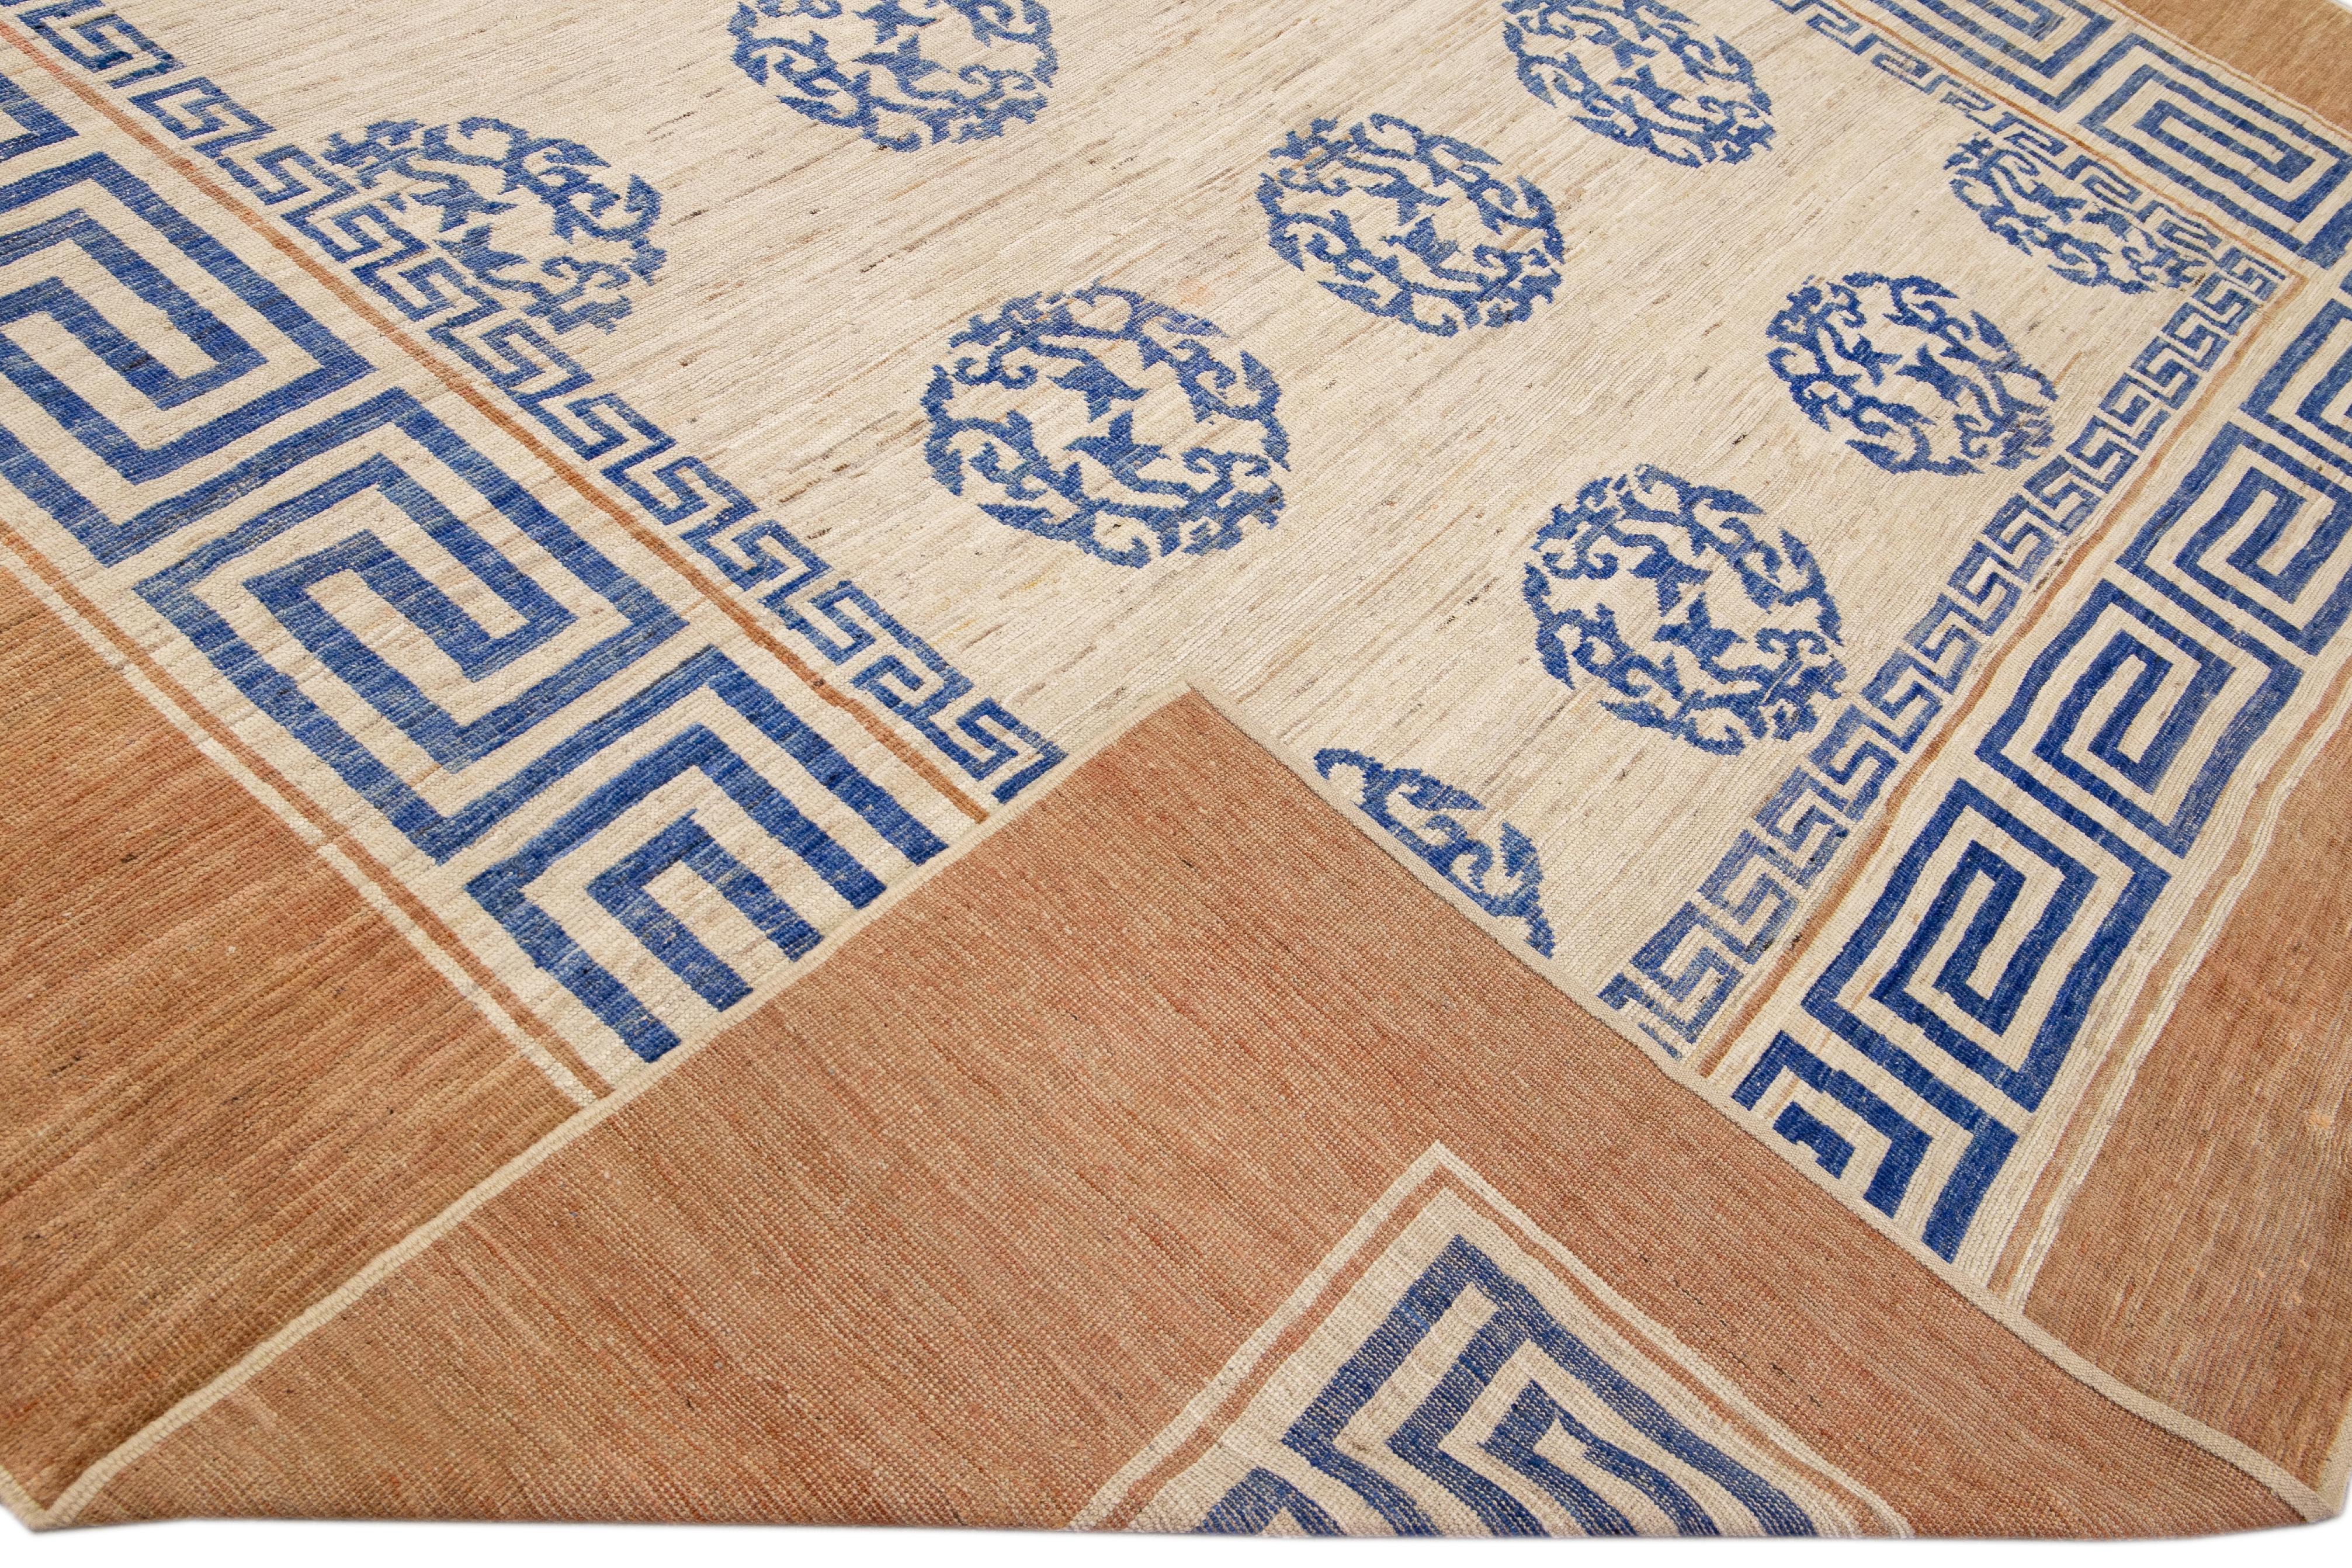 Beautiful handmade wool rug with a beige field. This Modern rug has a tan frame and blue accents featuring a gorgeous all-over greek key pattern design.

This rug measures: 11'11